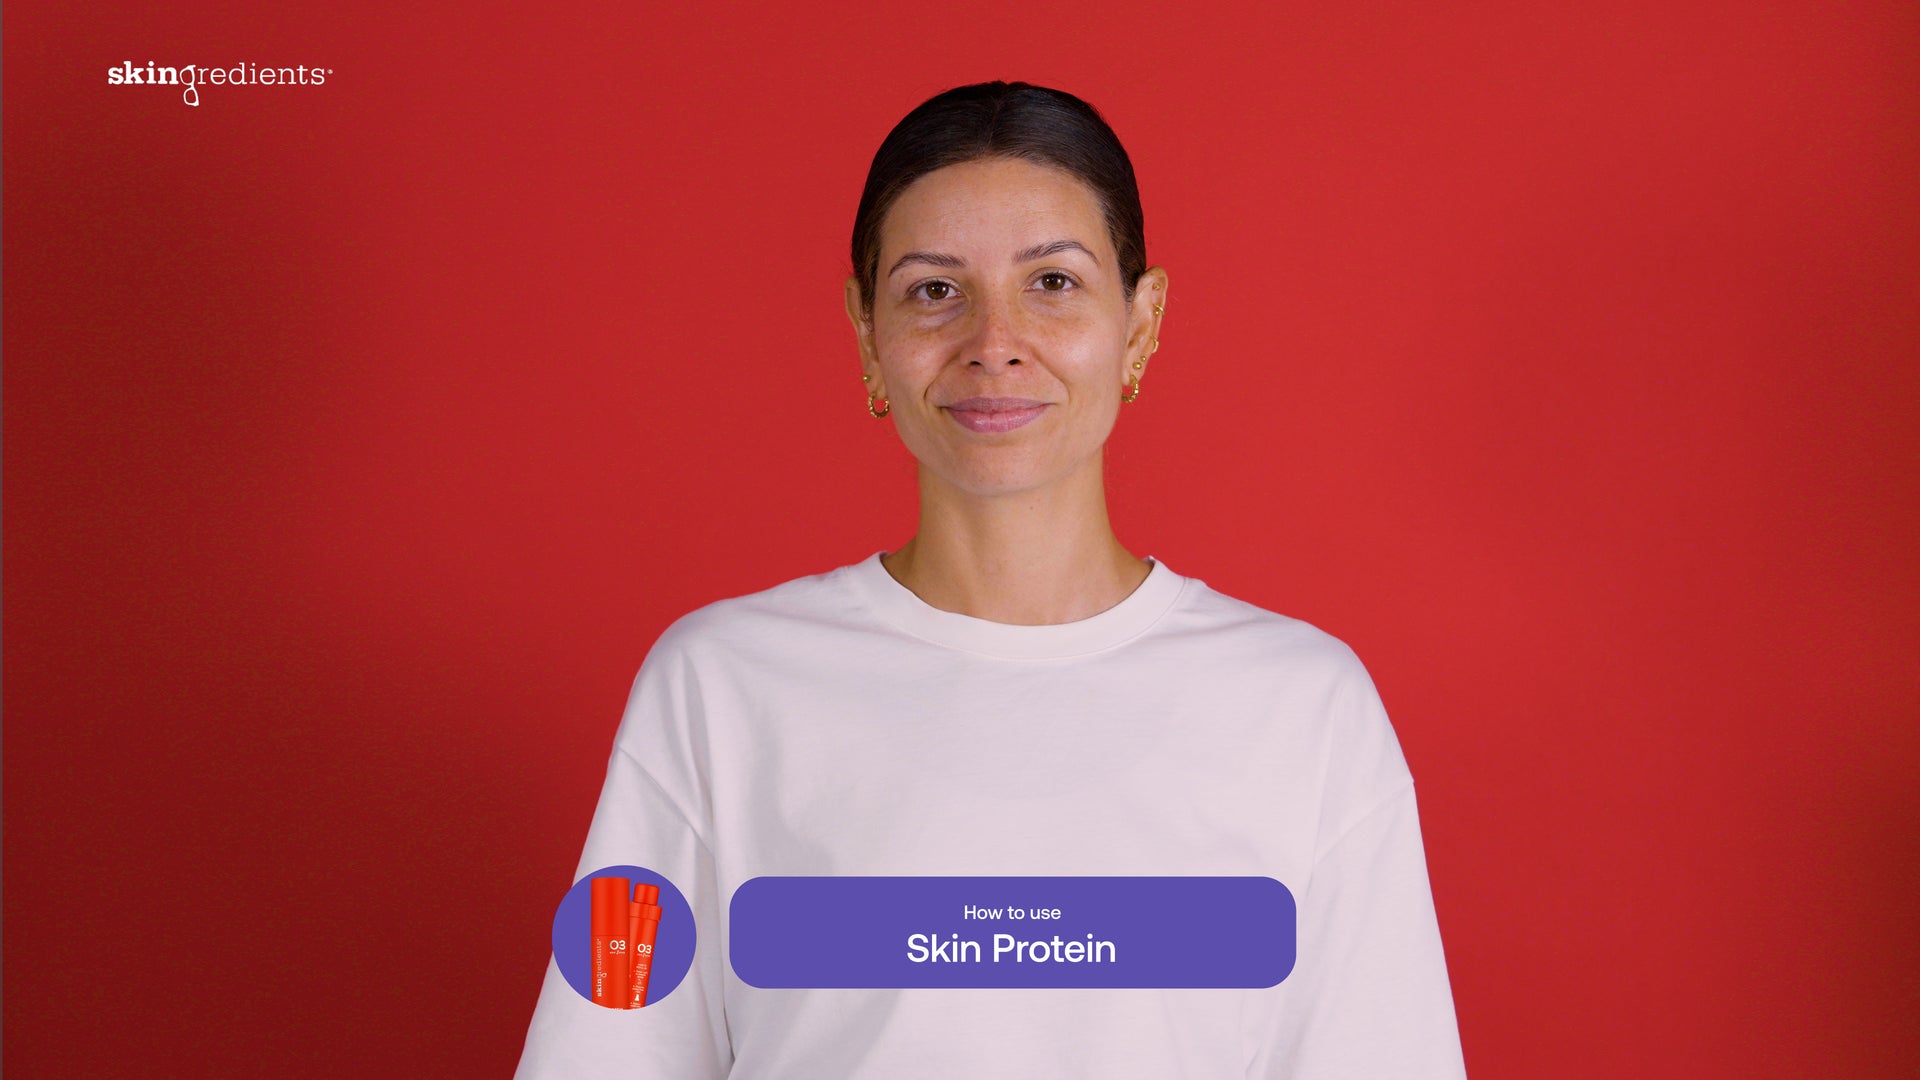 Load video: &lt;p&gt;A Skin Protein lover? Shop + save with this loyalty bundle.&lt;/p&gt;
&lt;p&gt;&lt;strong&gt;This bundle includes: &lt;/strong&gt;&lt;/p&gt;
&lt;p&gt;&lt;span data-mce-fragment=&quot;1&quot;&gt;&lt;strong&gt;x2 Skin Protein Anti-Ageing Retinoid Serum refills.&lt;/strong&gt; &lt;/span&gt;Skingredients® Skin Protein (45ml) is your skincare gamechanger – a lightweight, anti-ageing vitamin A, C + E serum. Like a genie (in a red bottle), Skin Protein grants 3 wishes: tighter, brighter + smoother skin. It’s a creamy, hydrating serum to be slathered on your face, eyes, neck + chest! Protein gives your body the strength it needs, and Skin Protein’s rock star ingredient, retinyl palmitate (read: the fatty form of vitamin A that’s much gentler on the skin), works to maintain strong + healthy skin. Retinyl palmitate, accompanied by beta carotene (a precursor to vitamin A), promises to speed up cell renewal + re-educate the skin for regeneration station. Our Skin Protein also contains a pro-collagen peptide to plump fine lines + wrinkles, vitamins C + E, which are powerful antioxidants that help to neutralise the ageing effects of free radical activity, and skin-soothing rooibos tea + green tea extract for added antioxidant goodness – because you can never have enough!&lt;/p&gt;
&lt;p&gt;Skin Protein is the 03® step in our KeyFour product range. Use it in the AM + PM to tackle a line-up of skin concerns, including dullness, lines and wrinkles, lax skin, dark circles, blackheads, whiteheads, lumps, bumps, large pores and excessive oiliness. Vitamin A is a skincare hero to guarantee visible results. It’s progressive enough for daily use, yet effective so you can quickly achieve noticeable results.&lt;/p&gt;
&lt;p&gt;&lt;strong&gt;NERDIE NOTE:&lt;/strong&gt; YOU MUST HAVE PURCHASED YOUR PRIMARY PACK BEFORE SWITCHING TO OUR VALUE-SAVING PLANET-FRIENDLY REFILLS!&lt;br&gt;&lt;/p&gt;